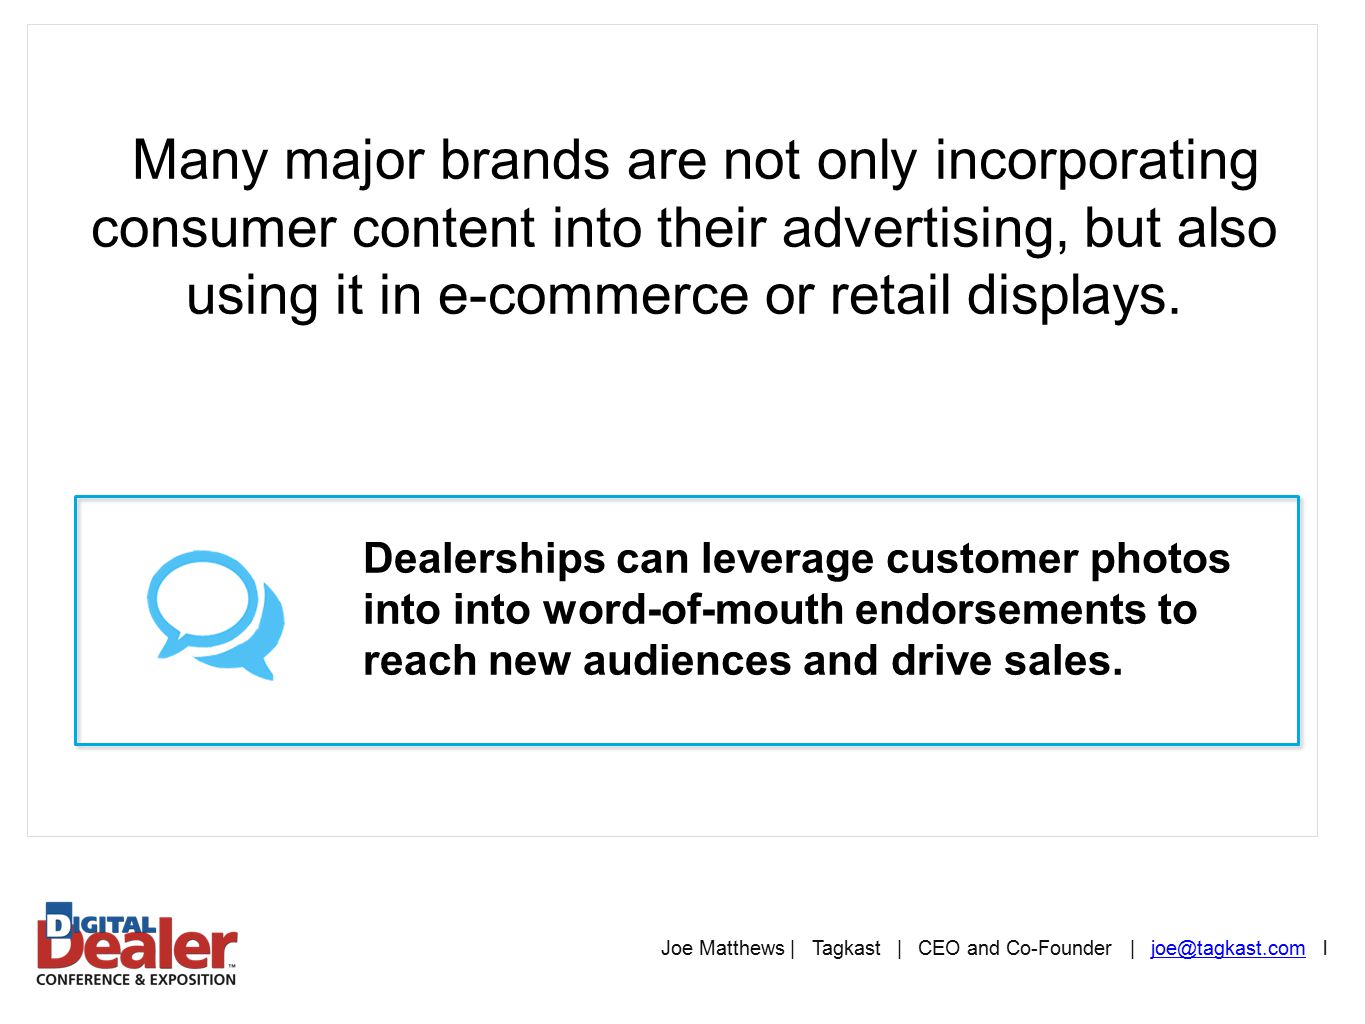 Many major brands are not only incorporating consumer content into their advertising, but also using it in e-commerce or retail displays.